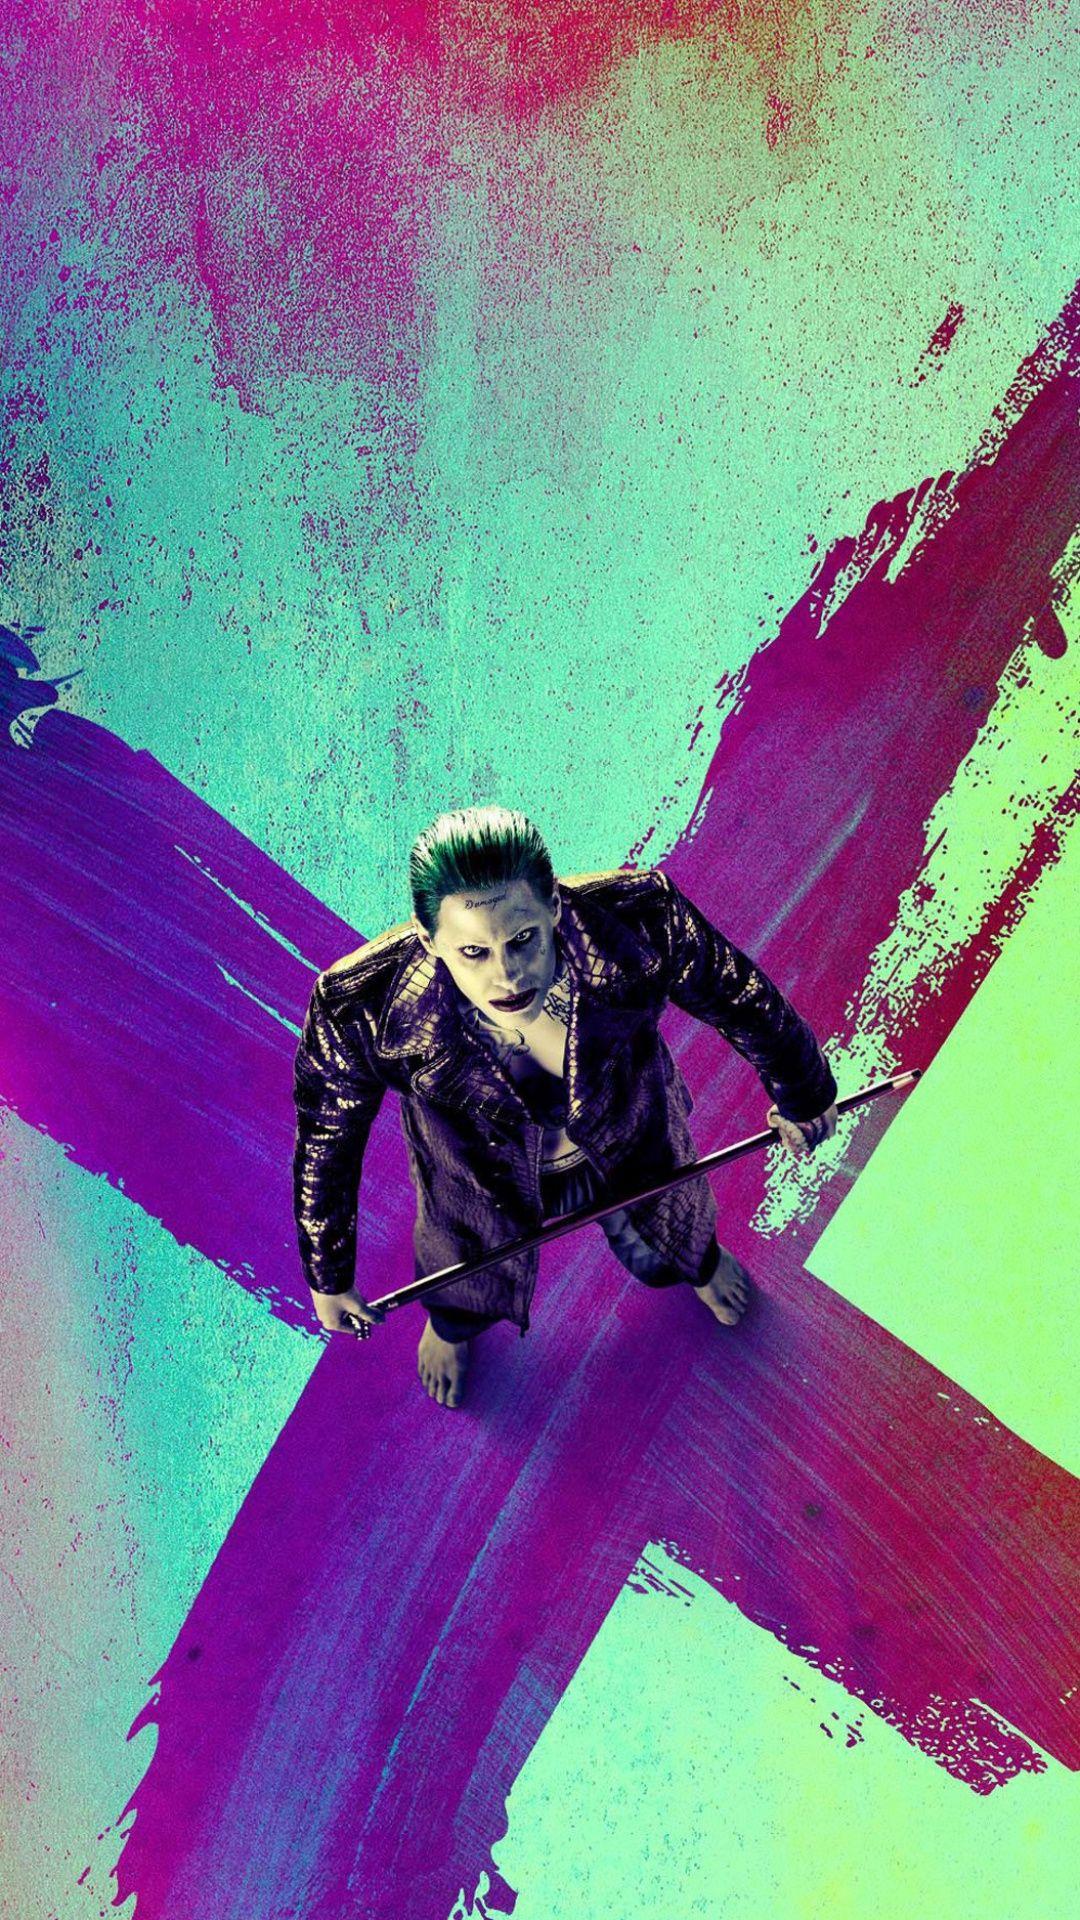 Joker Suicide Squad Top View X Android Wallpaper free download